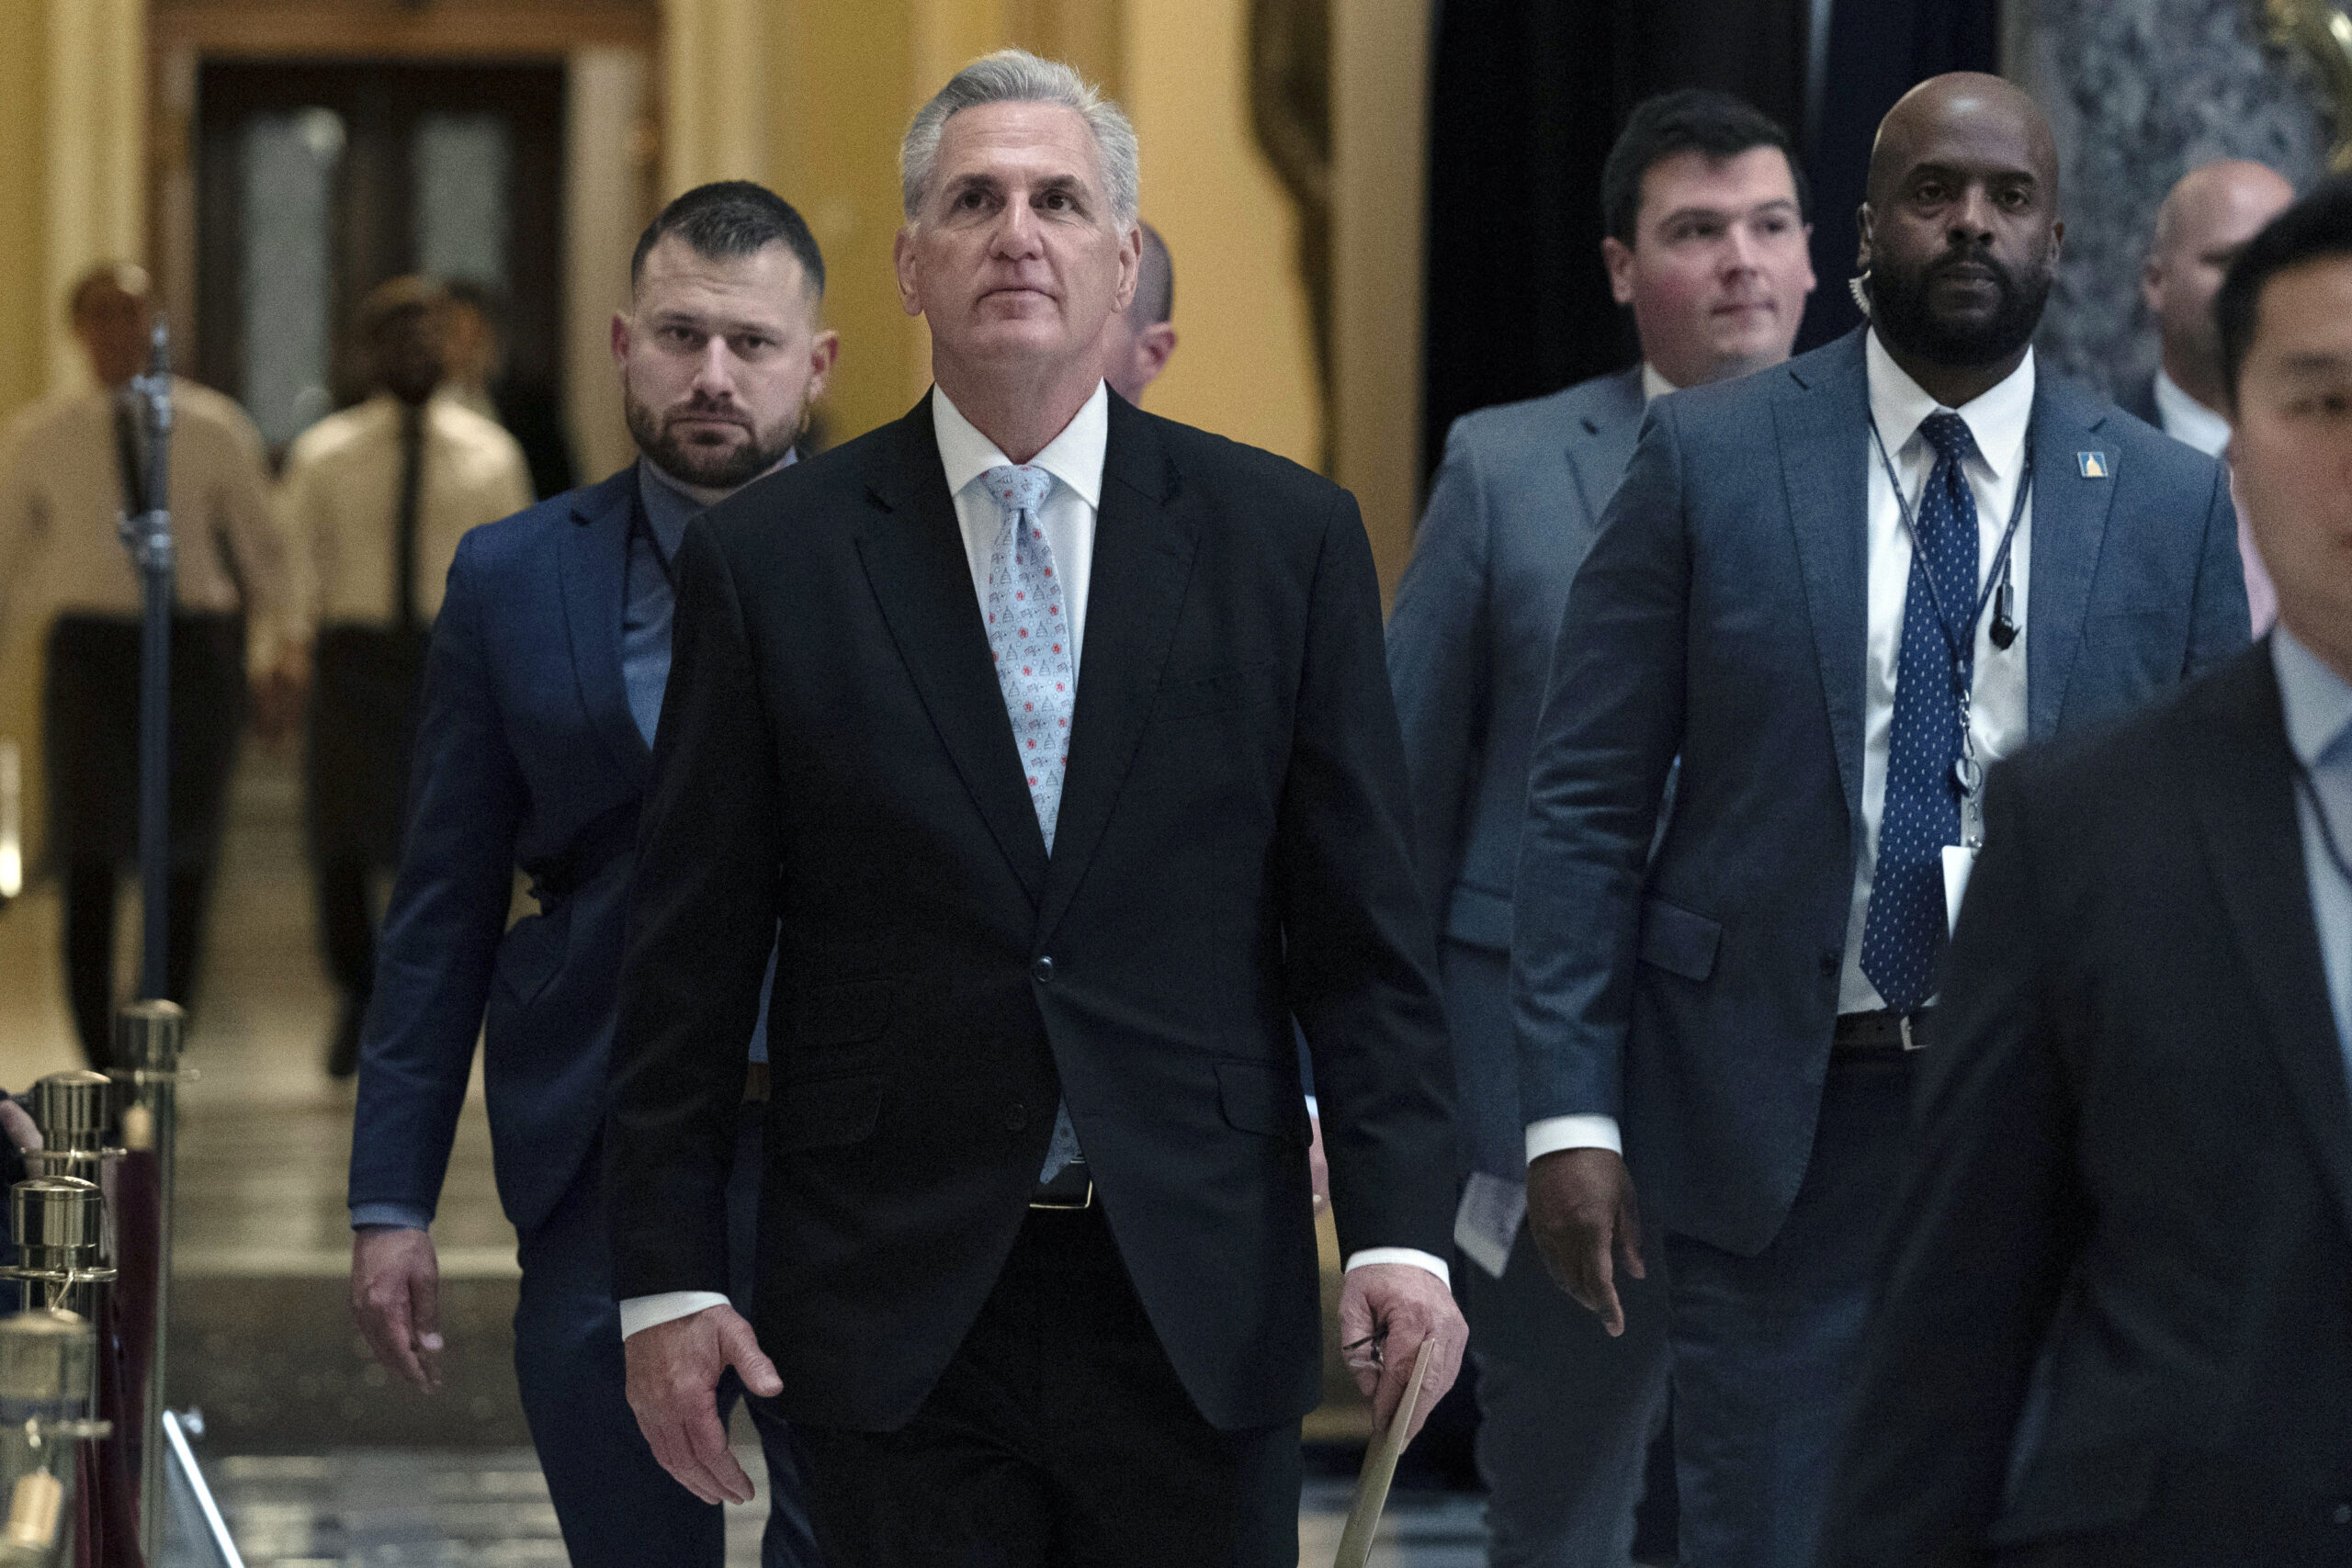 U.S. Speaker Kevin McCarthy walking in the U.S. Capitol with several other people